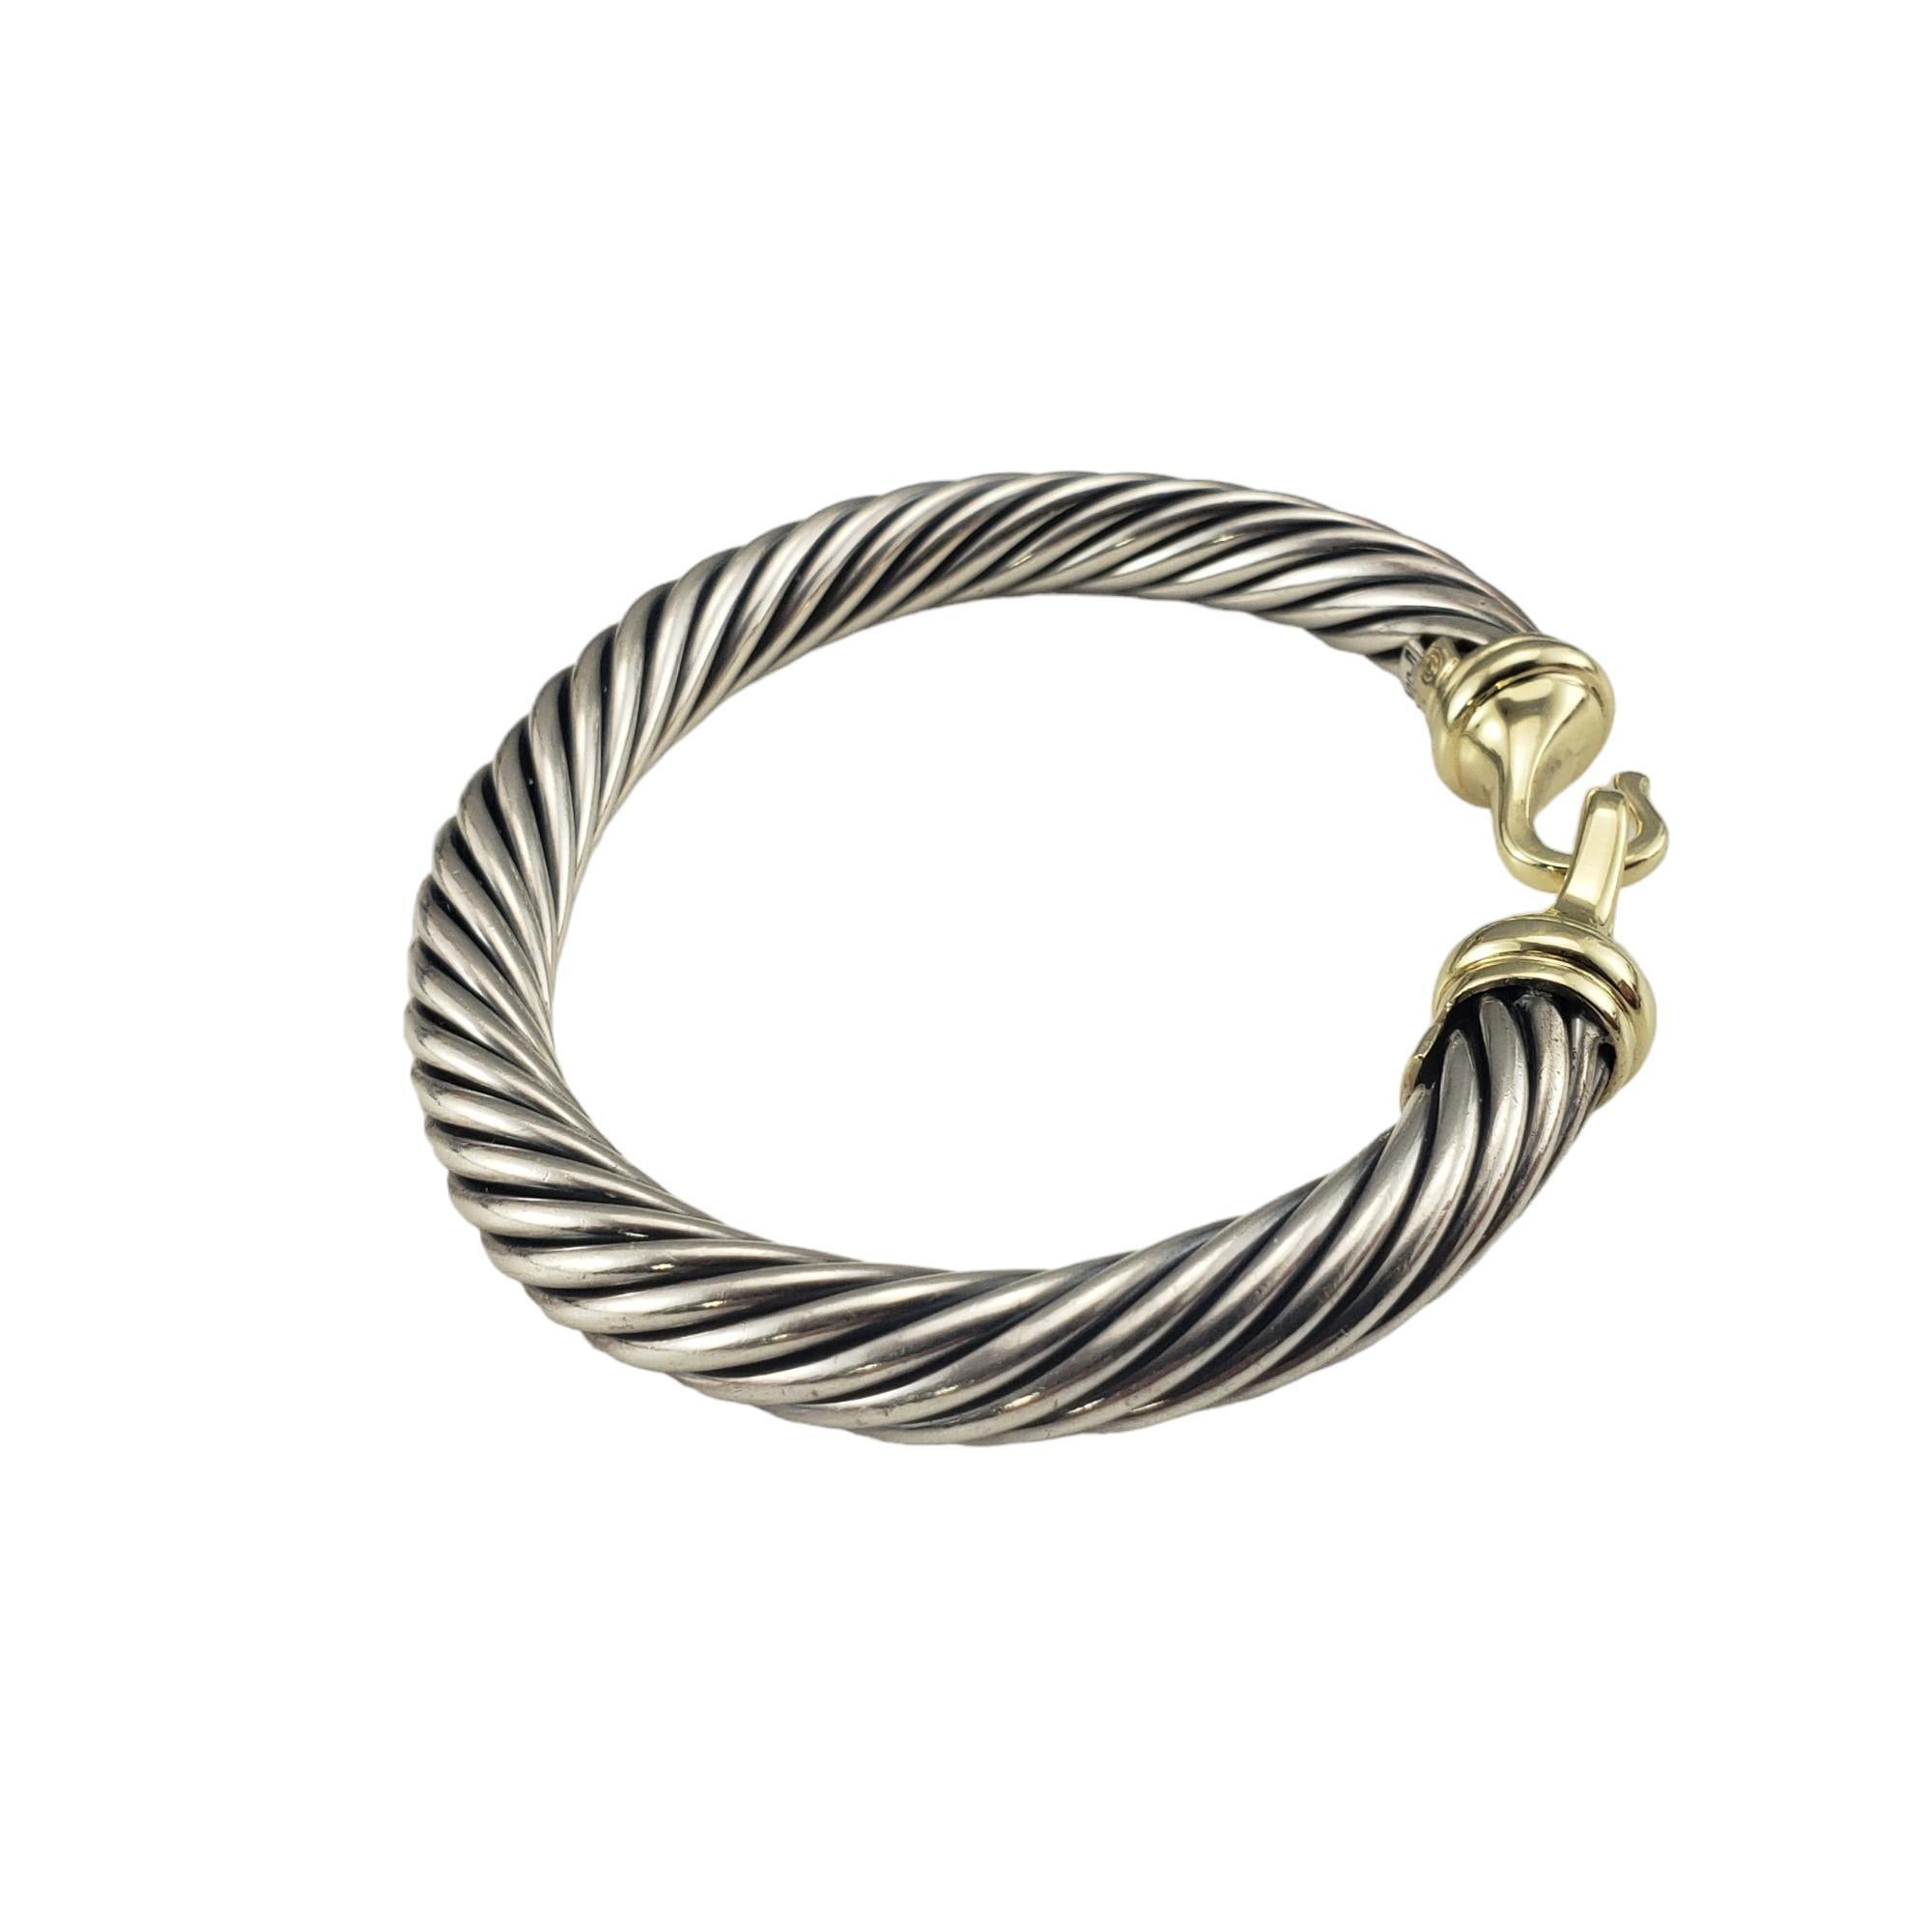 David Yurman Sterling Silver and 14K Yellow Gold Cable Buckle Bracelet-

This stunning David Yurman cable bracelet is crafted in beautifully detailed sterling silver and 14K yellow gold.  Buckle closure. 

Width: 7 mm.

Size: 6 inches

Hallmark: DY 